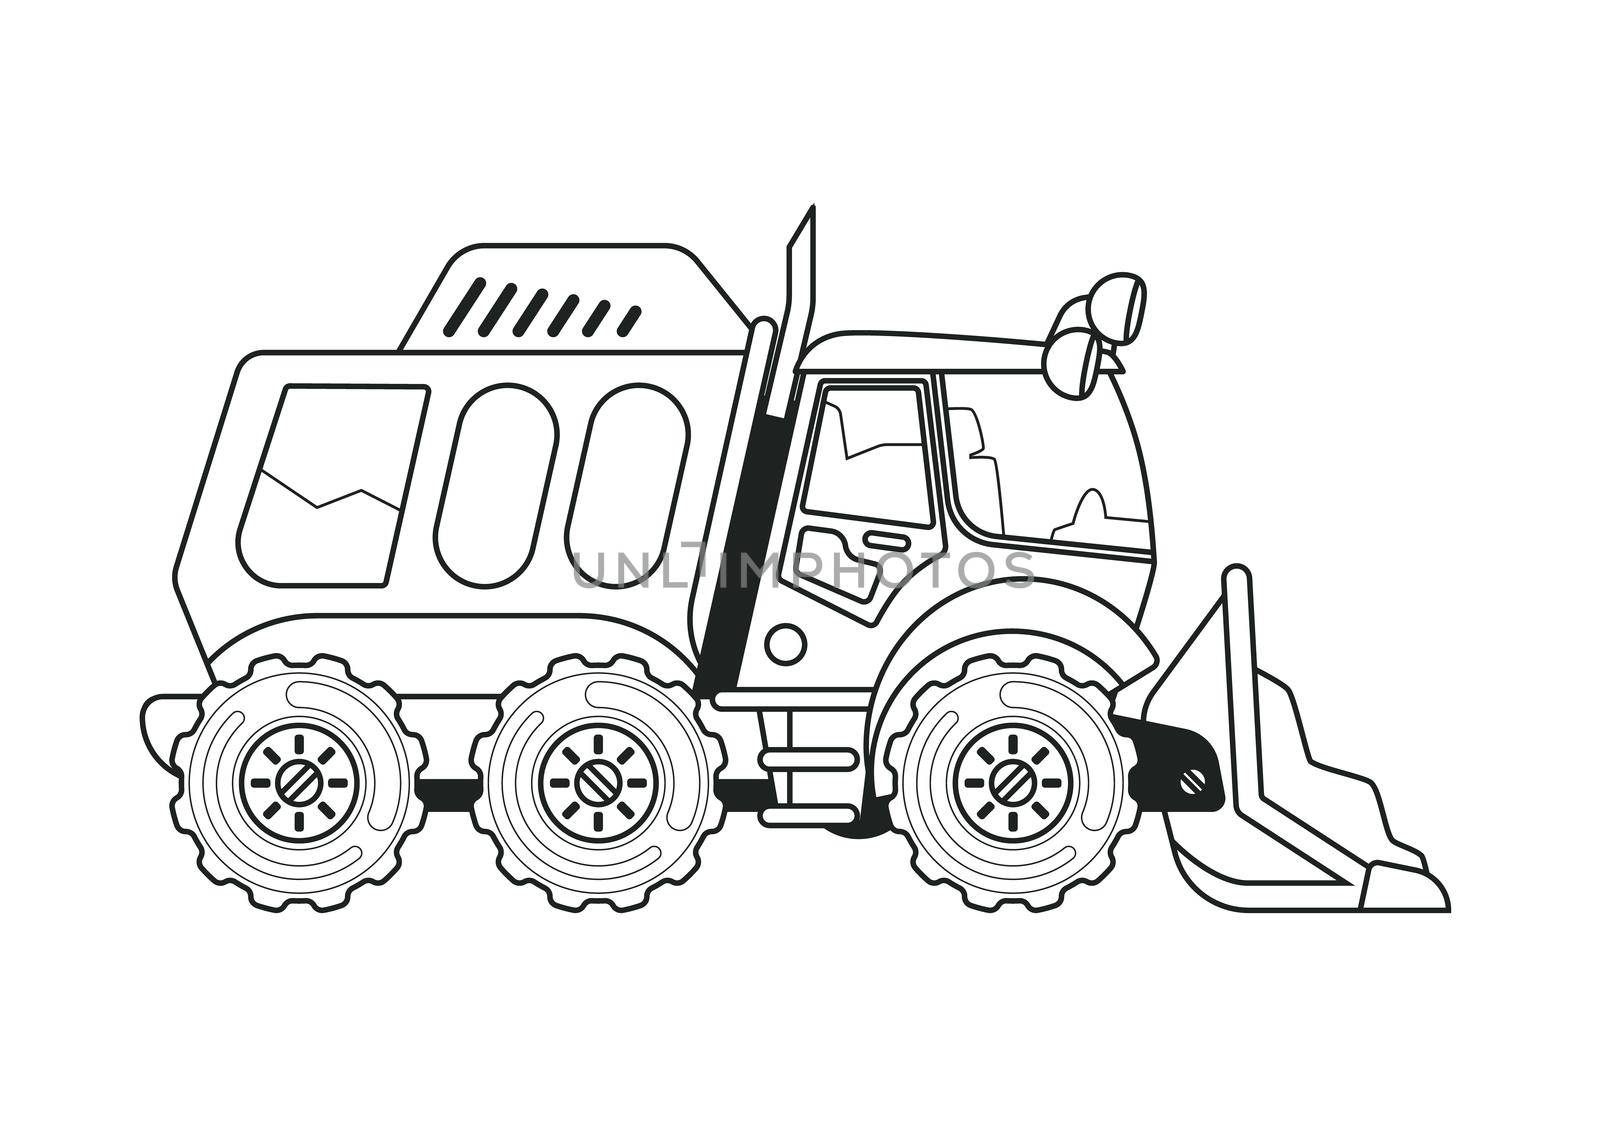 Cleaning Truck Coloring Book. Line Art.